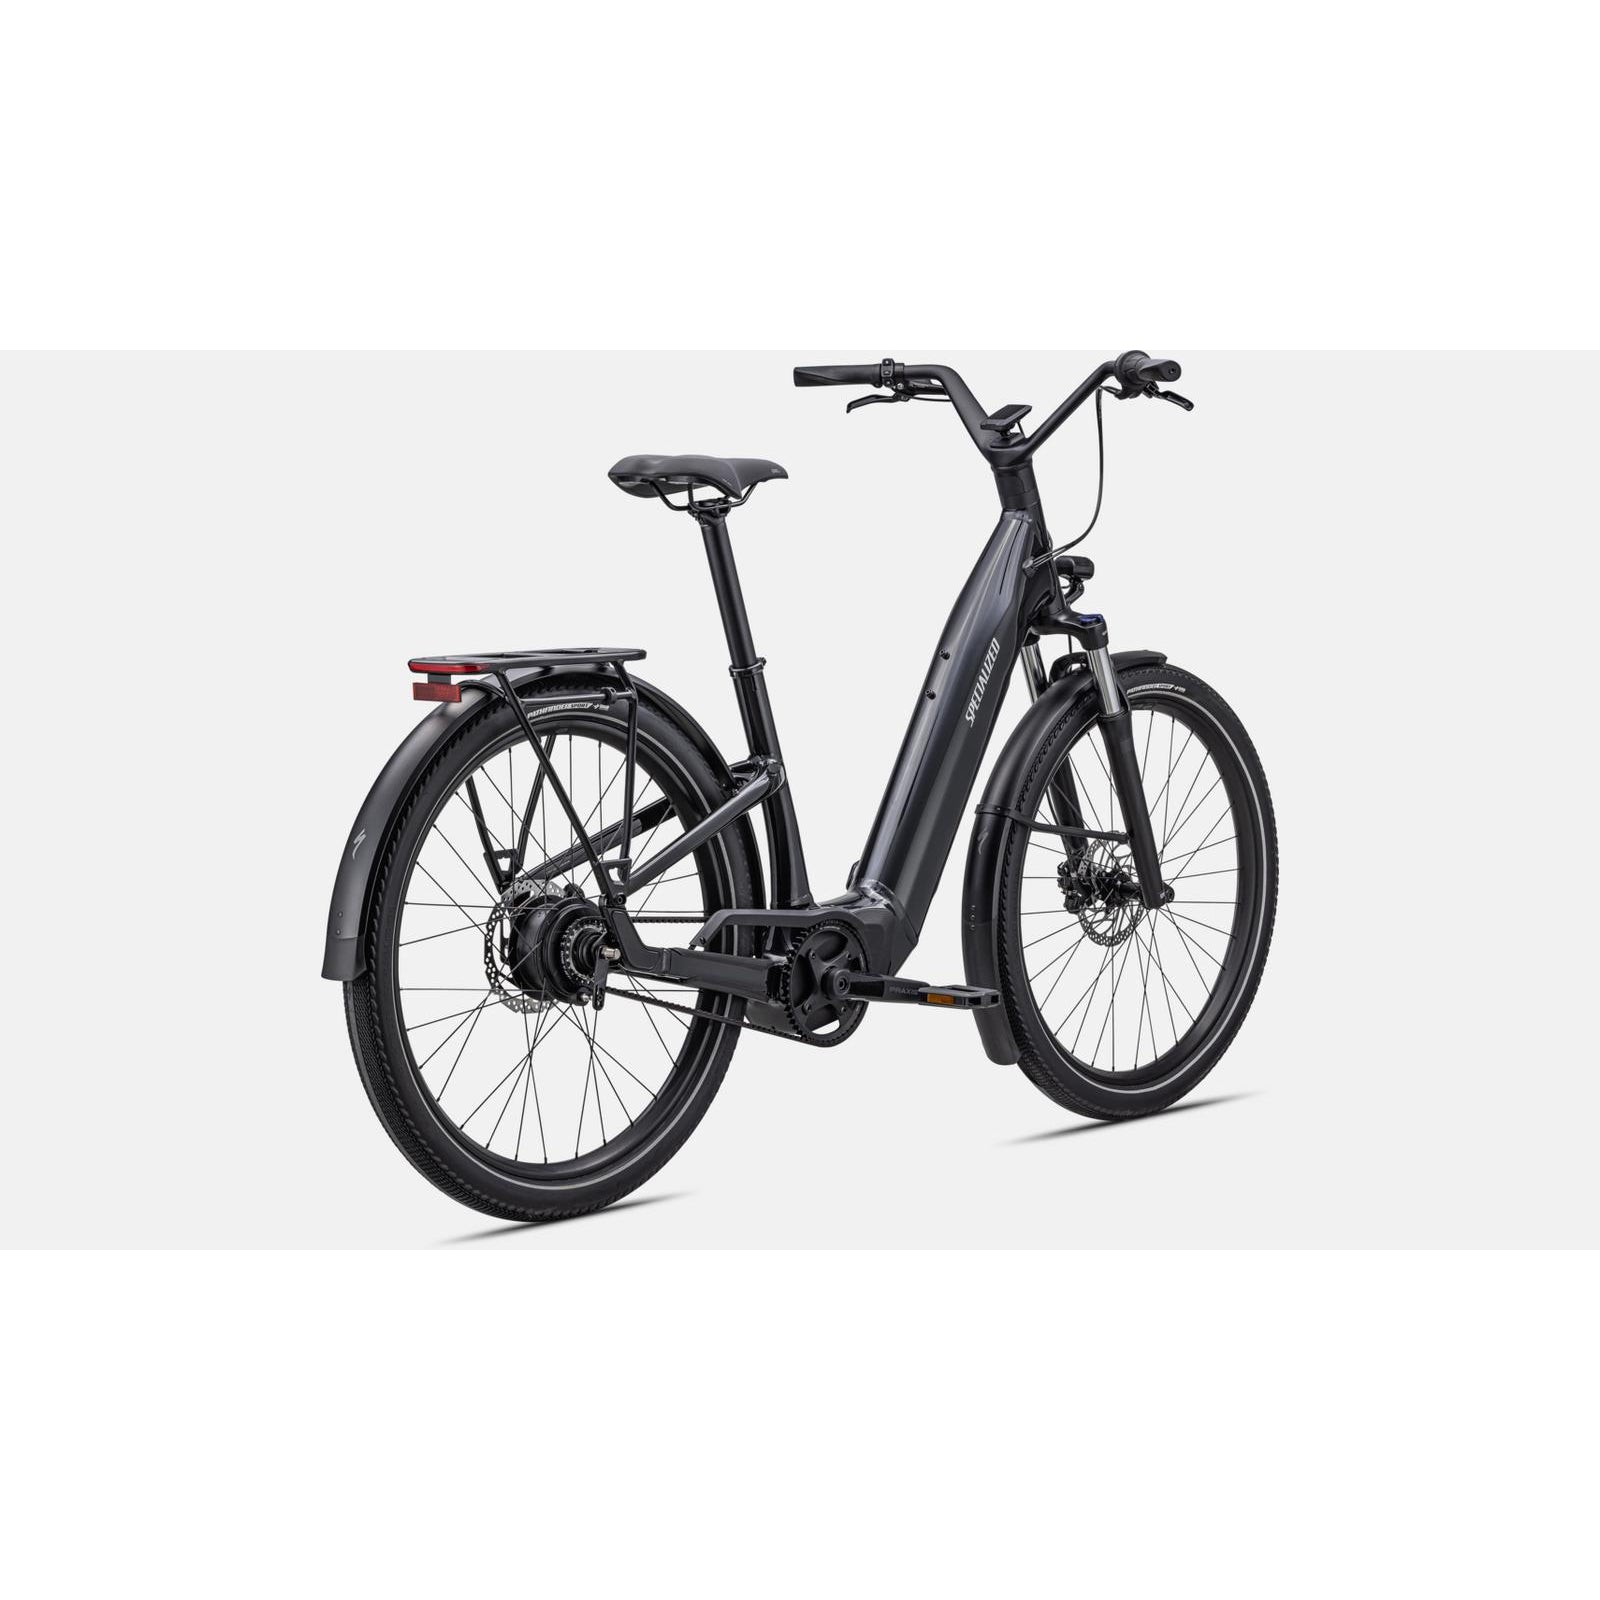 Specialized Turbo Como 3.0 IGH Active Electric Bike - Bikes - Bicycle Warehouse